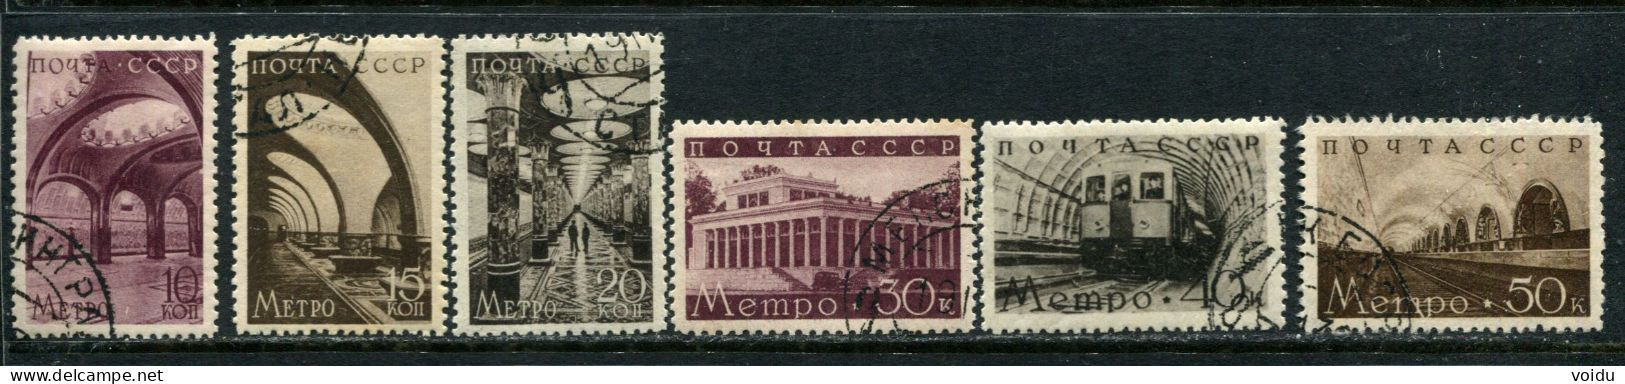 Russia 1938  Mi  646-651   Used - Used Stamps